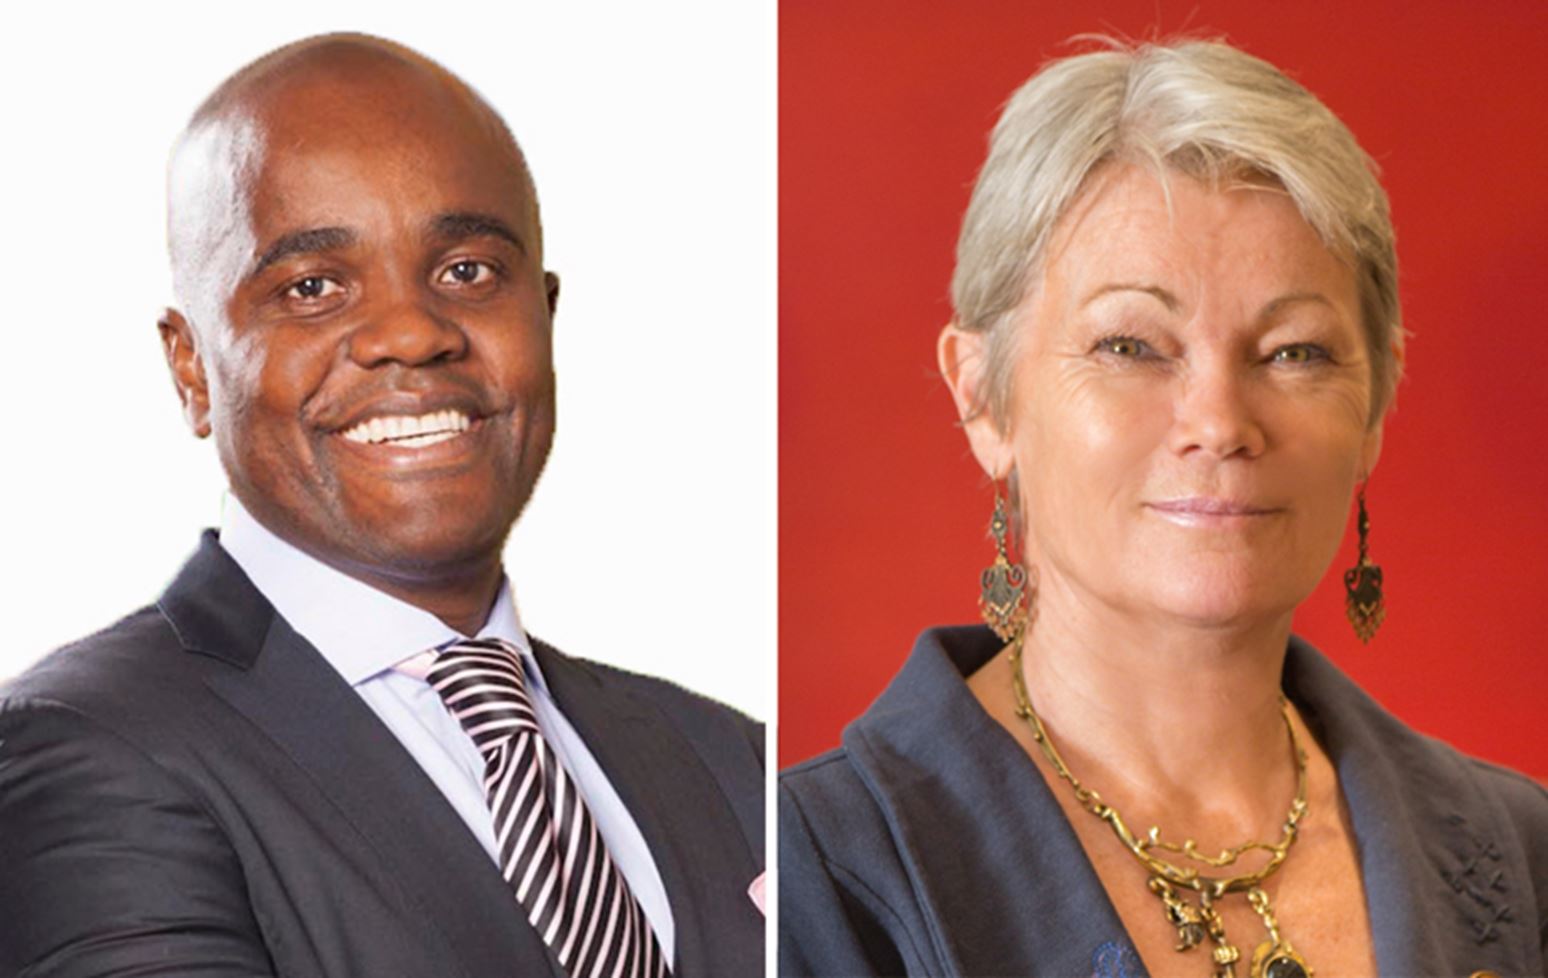 Conference keynote speakers: Wes Hall and Tracy Edwards MBE